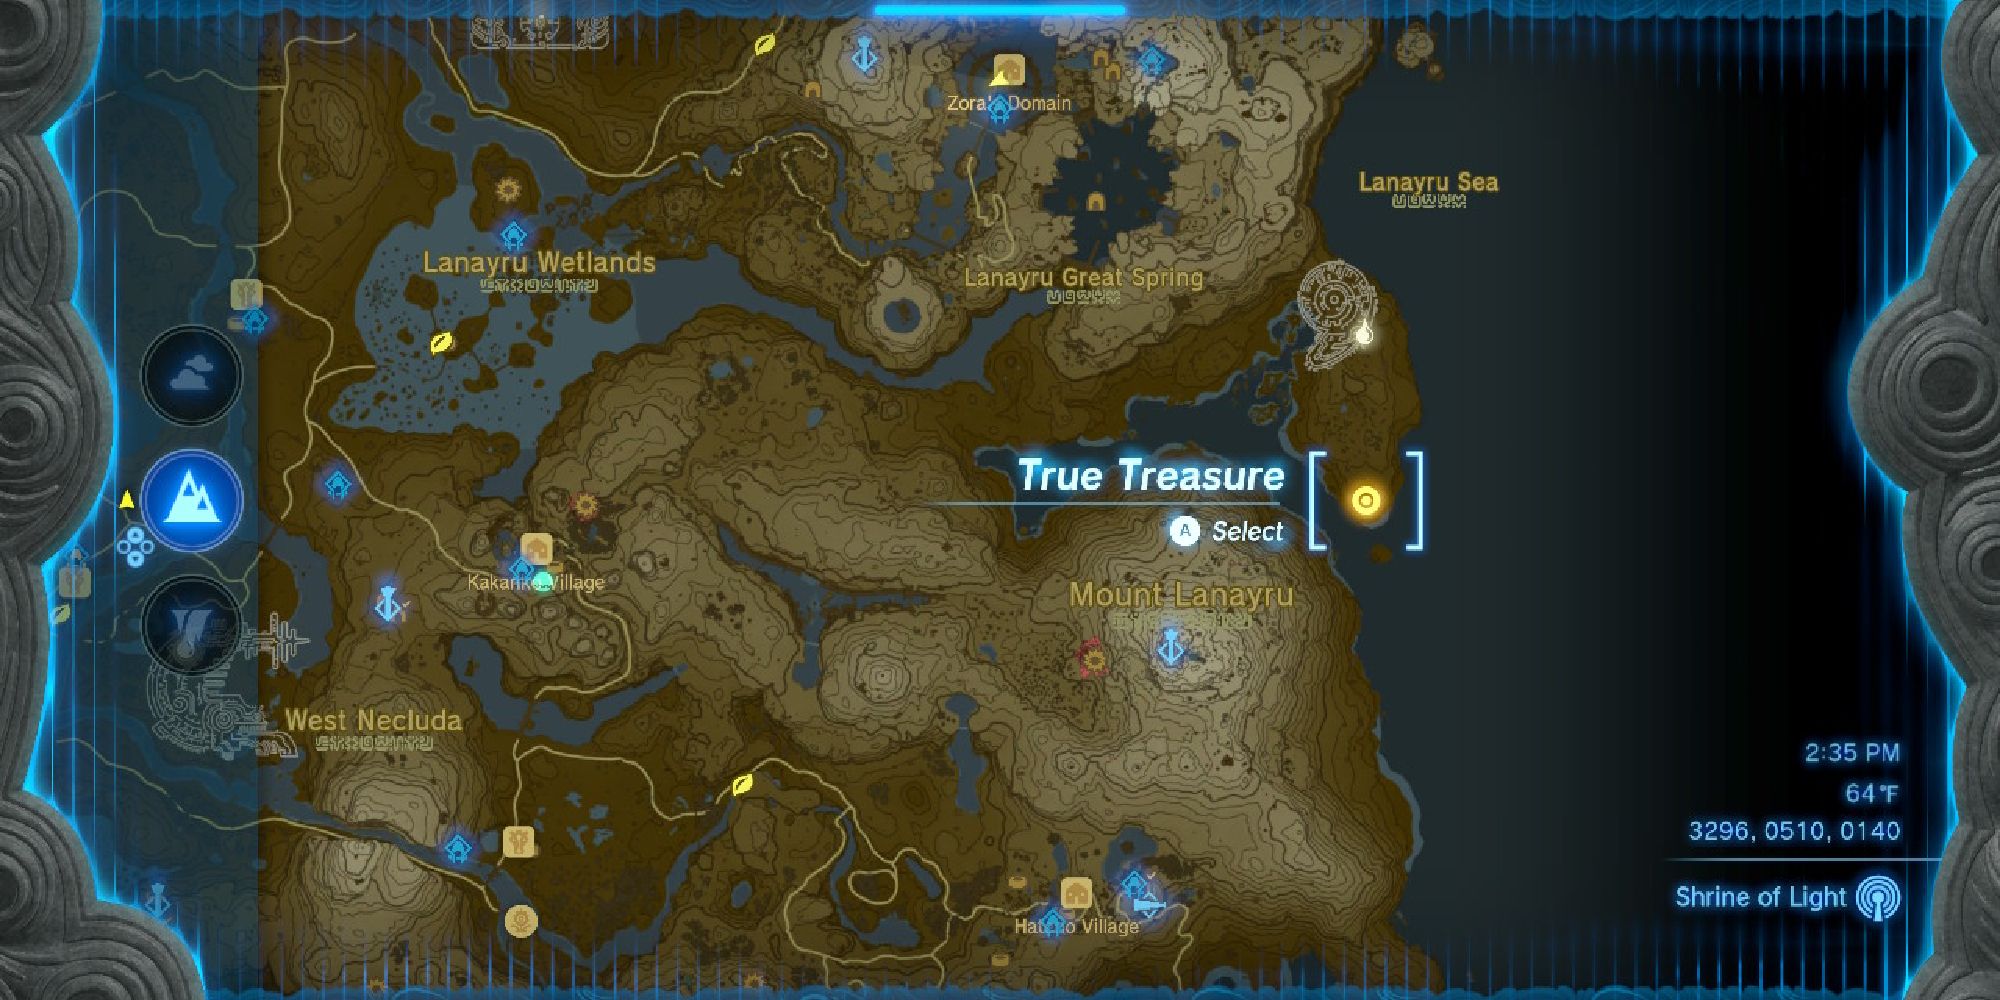 tears of the kingdom, a true treasure marked on the map